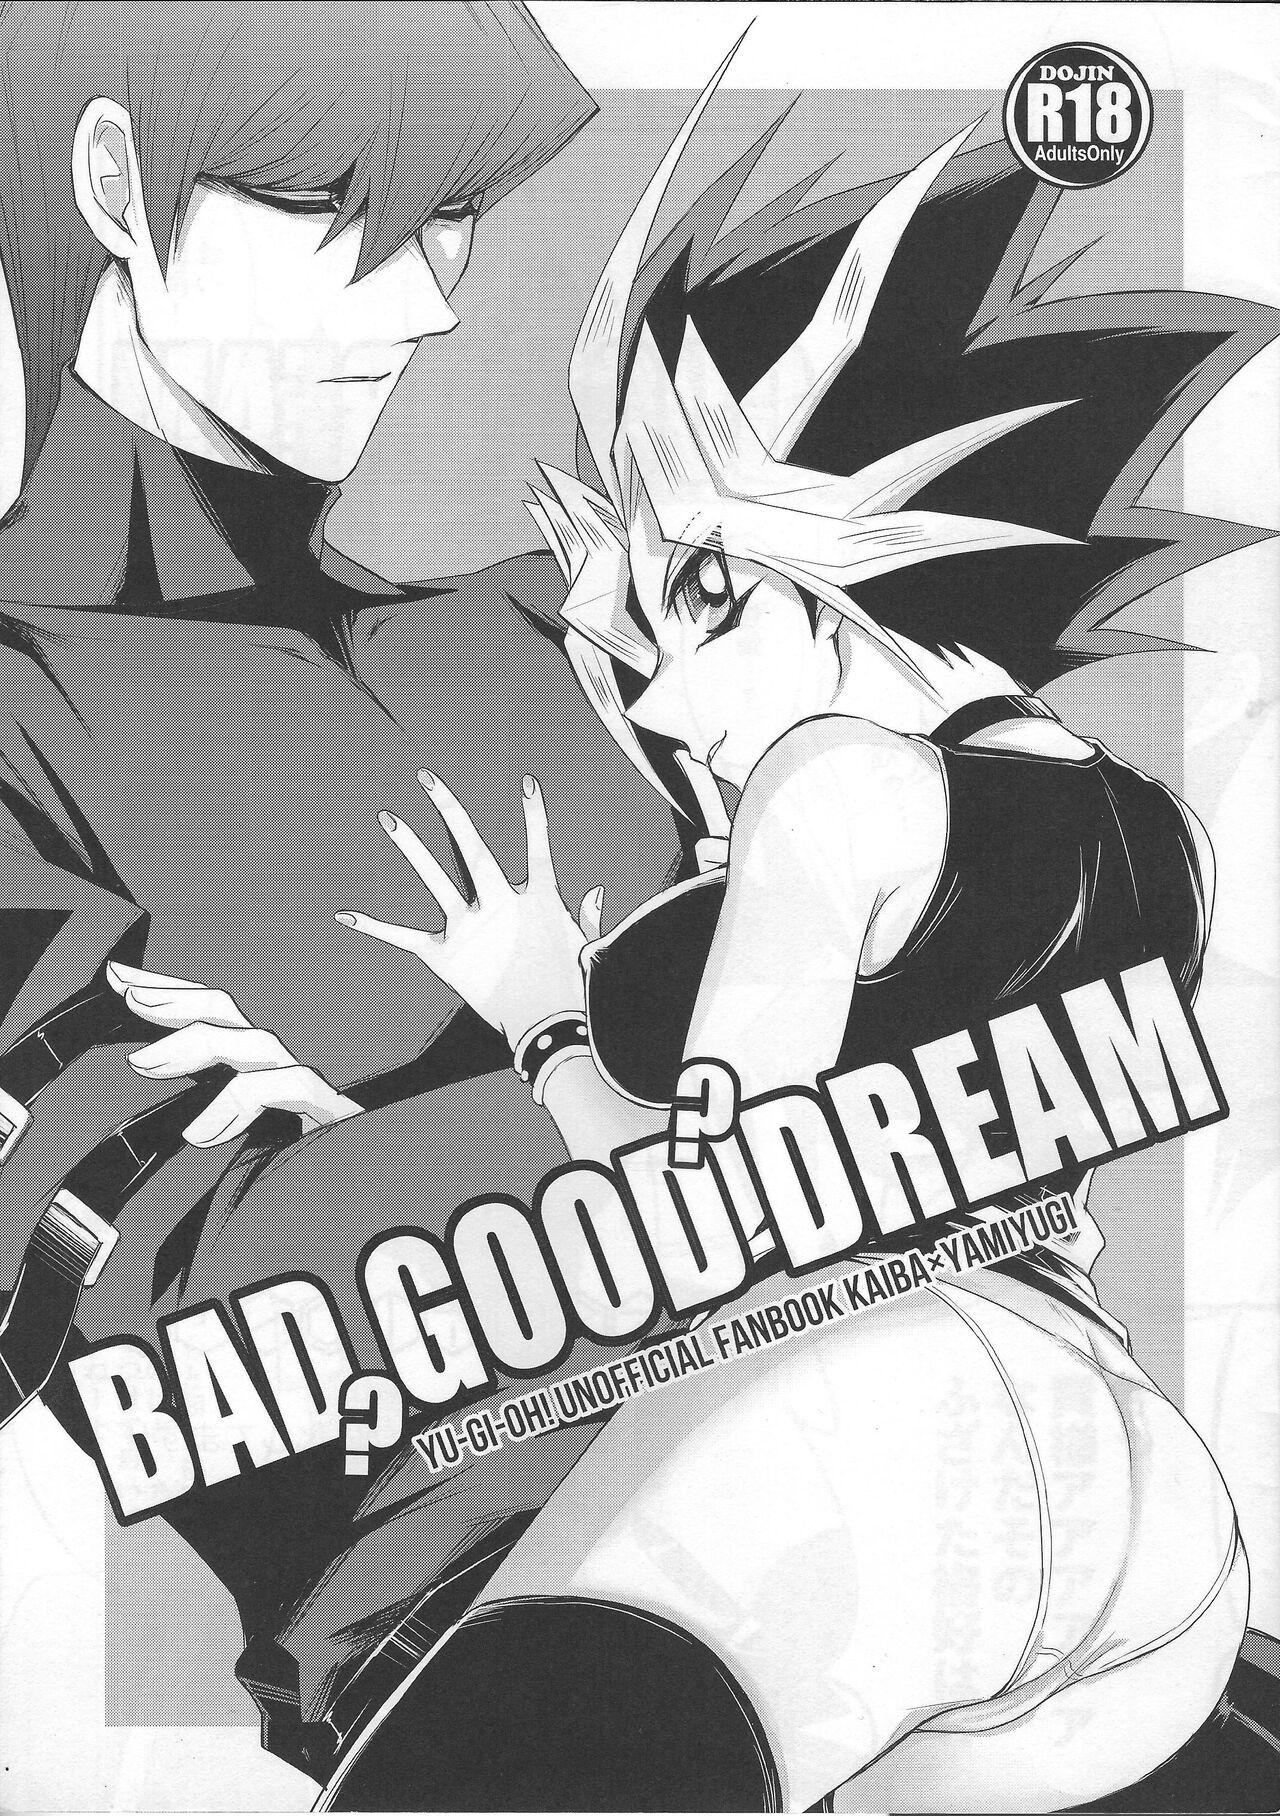 Tight BAD?GOOD?DREAM - Yu gi oh Bare - Picture 1